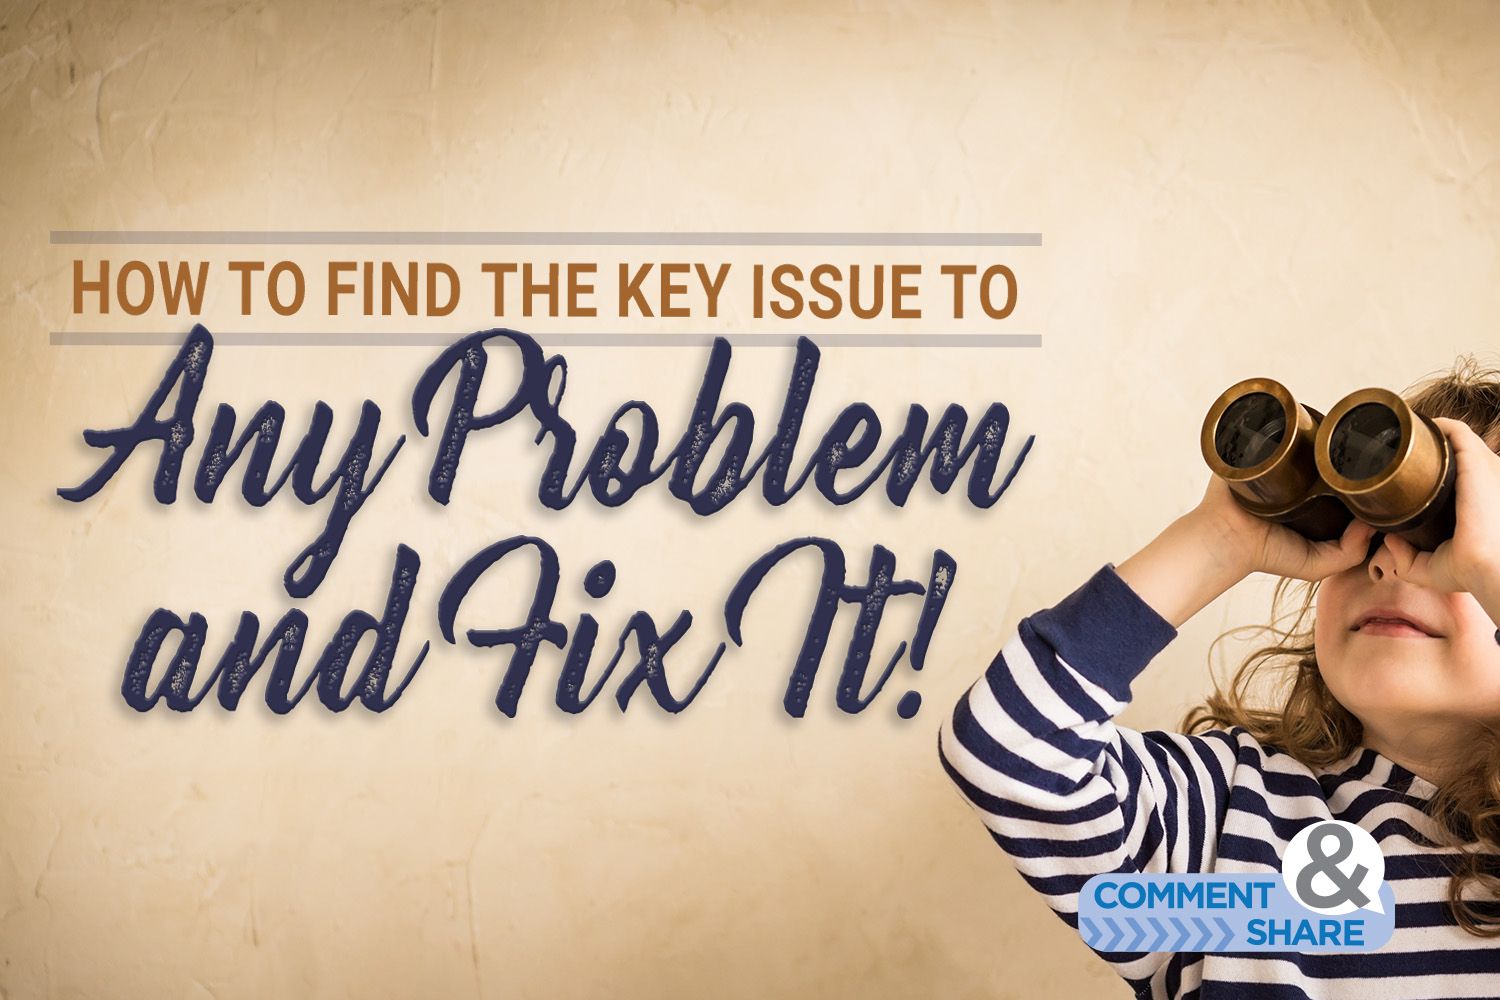 How to Find the Key Issue to Any Problem and Fix it! Blog post